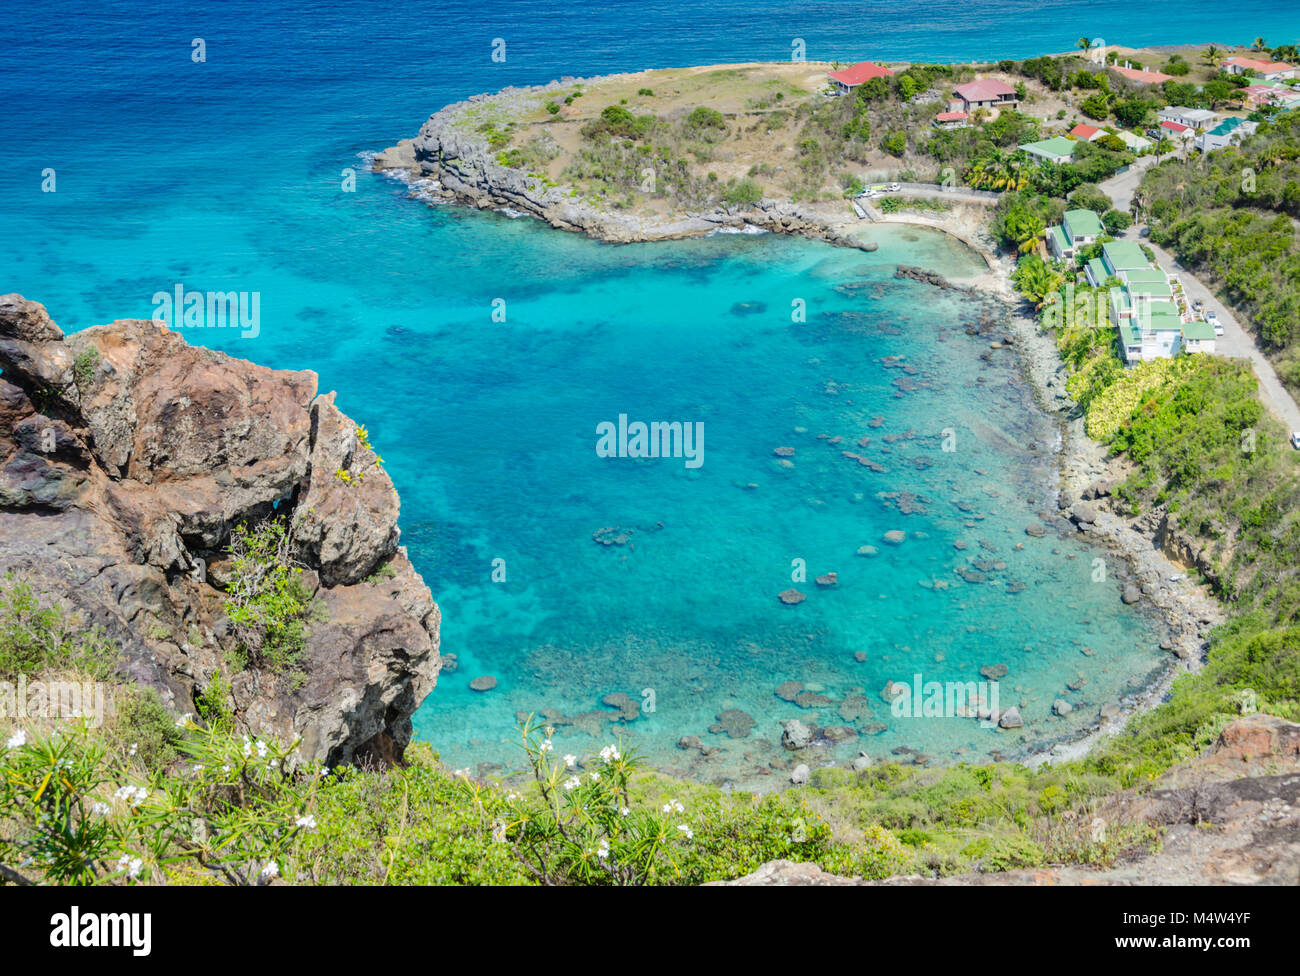 Aerial view of Point a Etages, a protected marine bay, on the West Indian island of St. Barths. Stock Photo